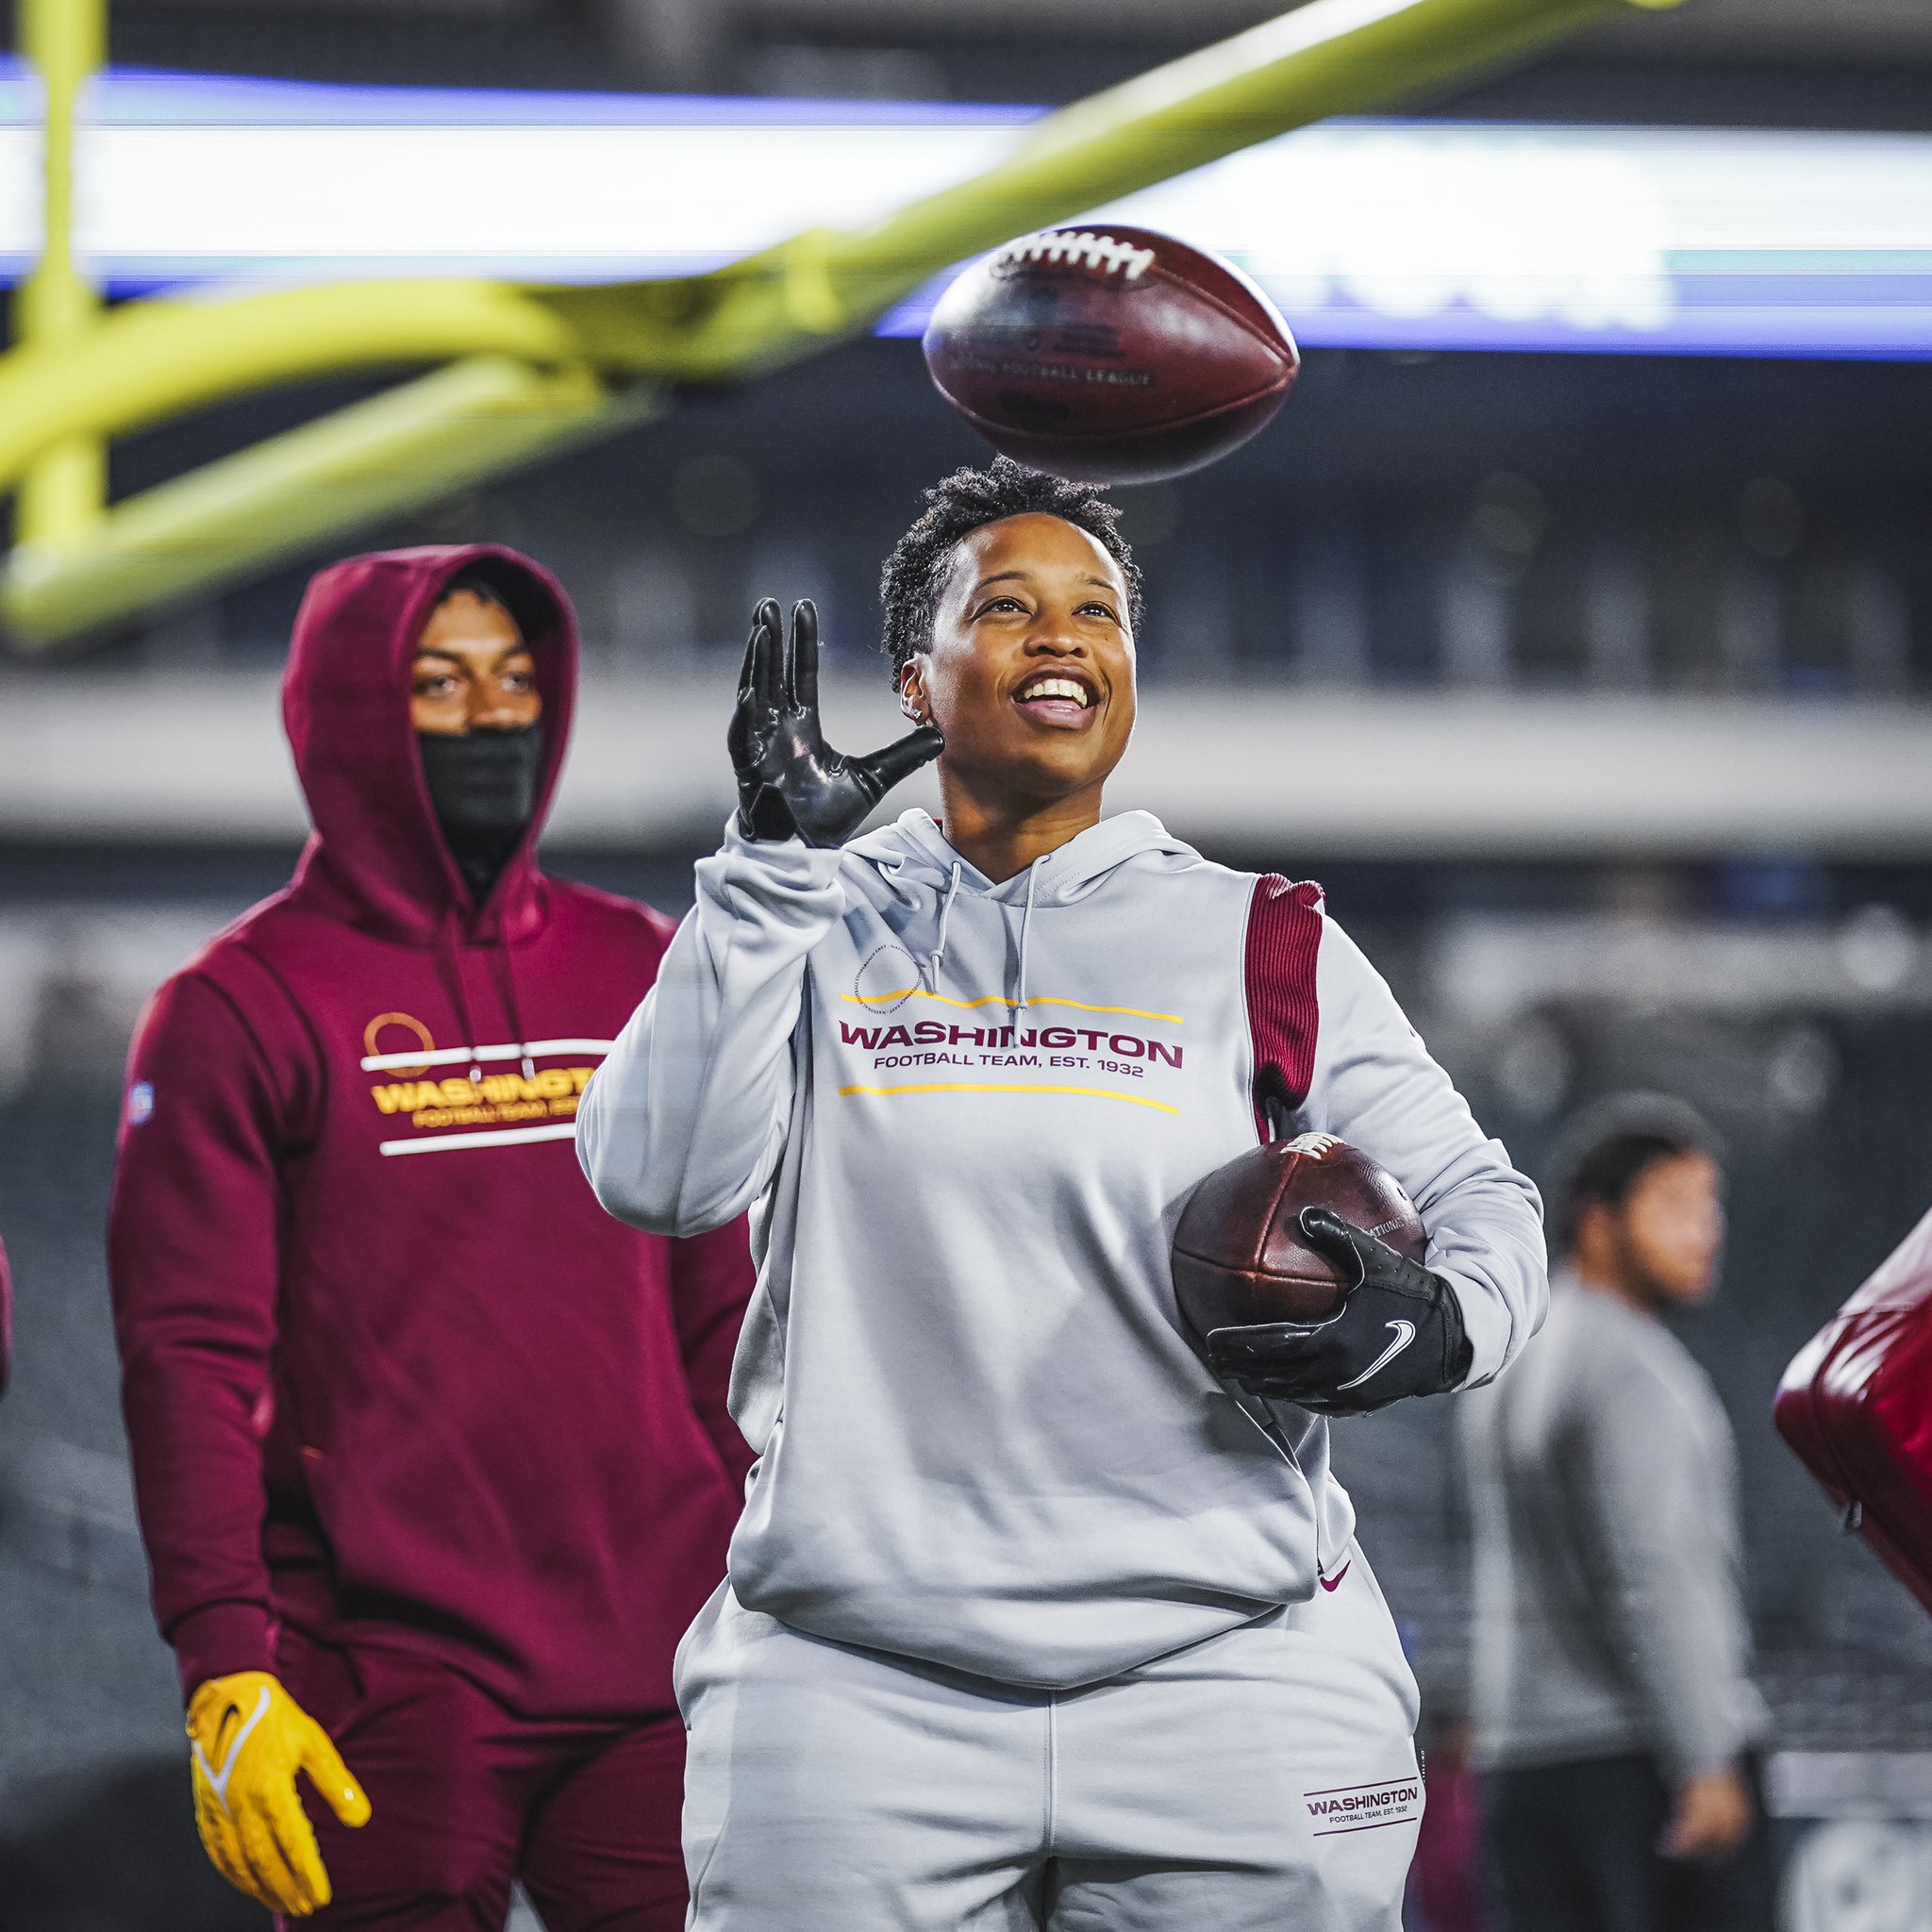 Washington’s Jennifer King Makes NFL History After Being Promoted to be Gameday Running Backs Coach